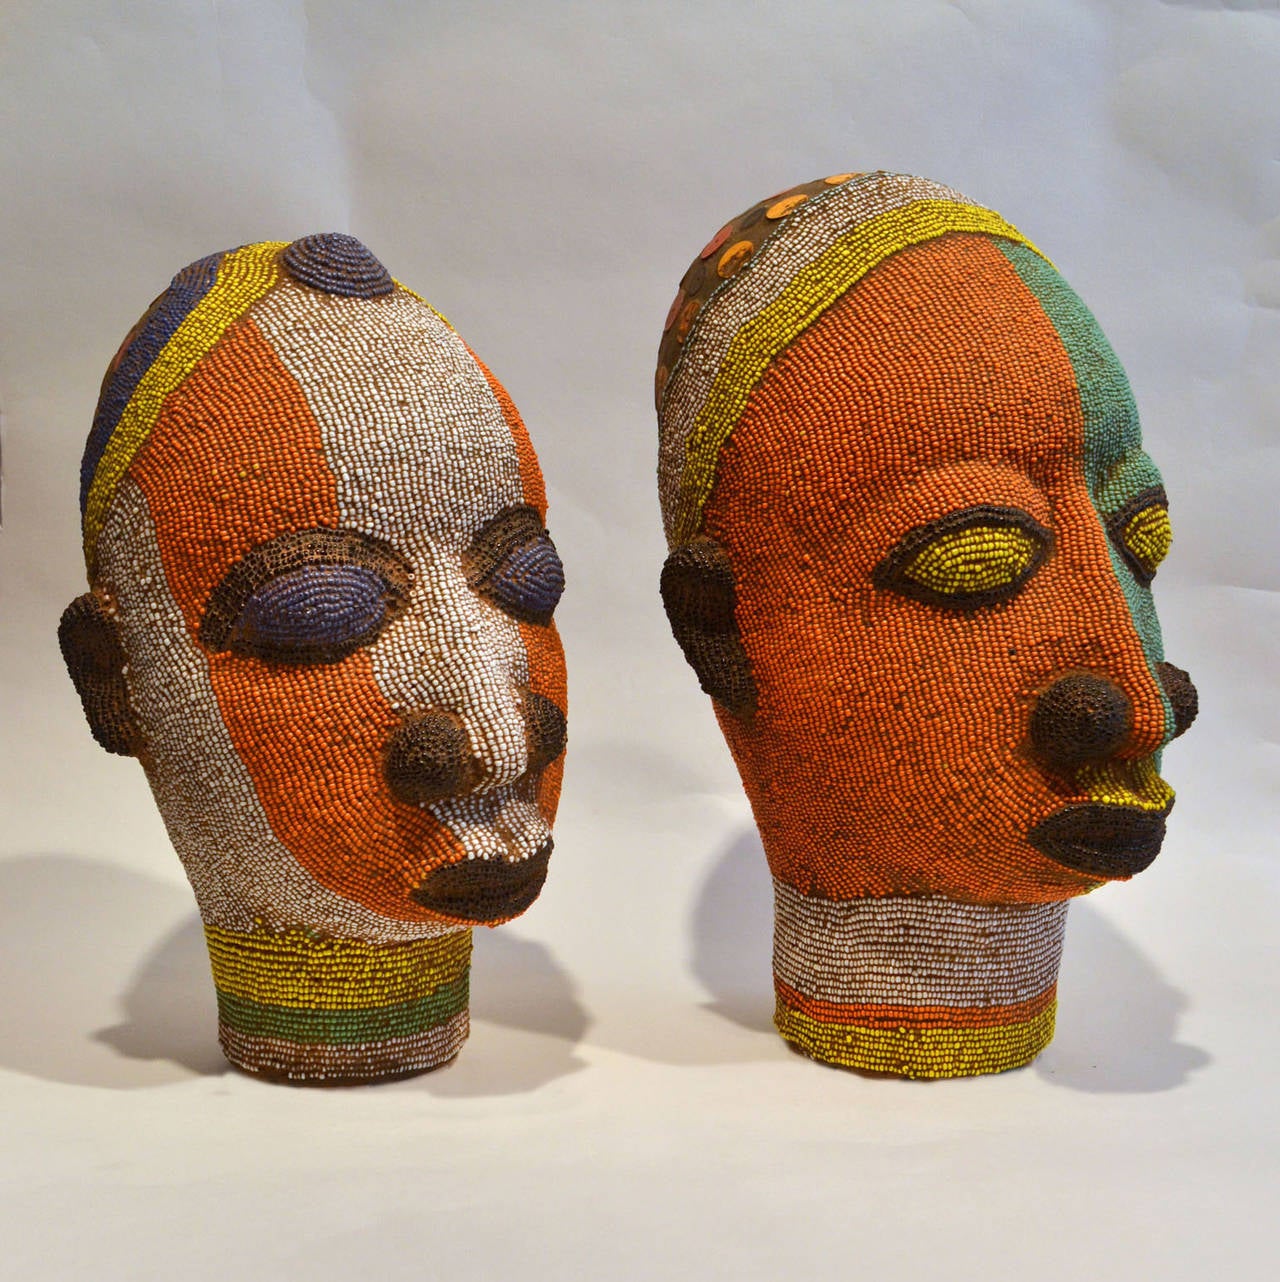 Brightly coloured beaded terracotta head commissioned in the 1960's to decorate wealthy Nigerian homes. 
The terracotta sculpture is inlaid with strings of beads over its ceramic form.
The artist was influenced by 16th century Benin bronzes.